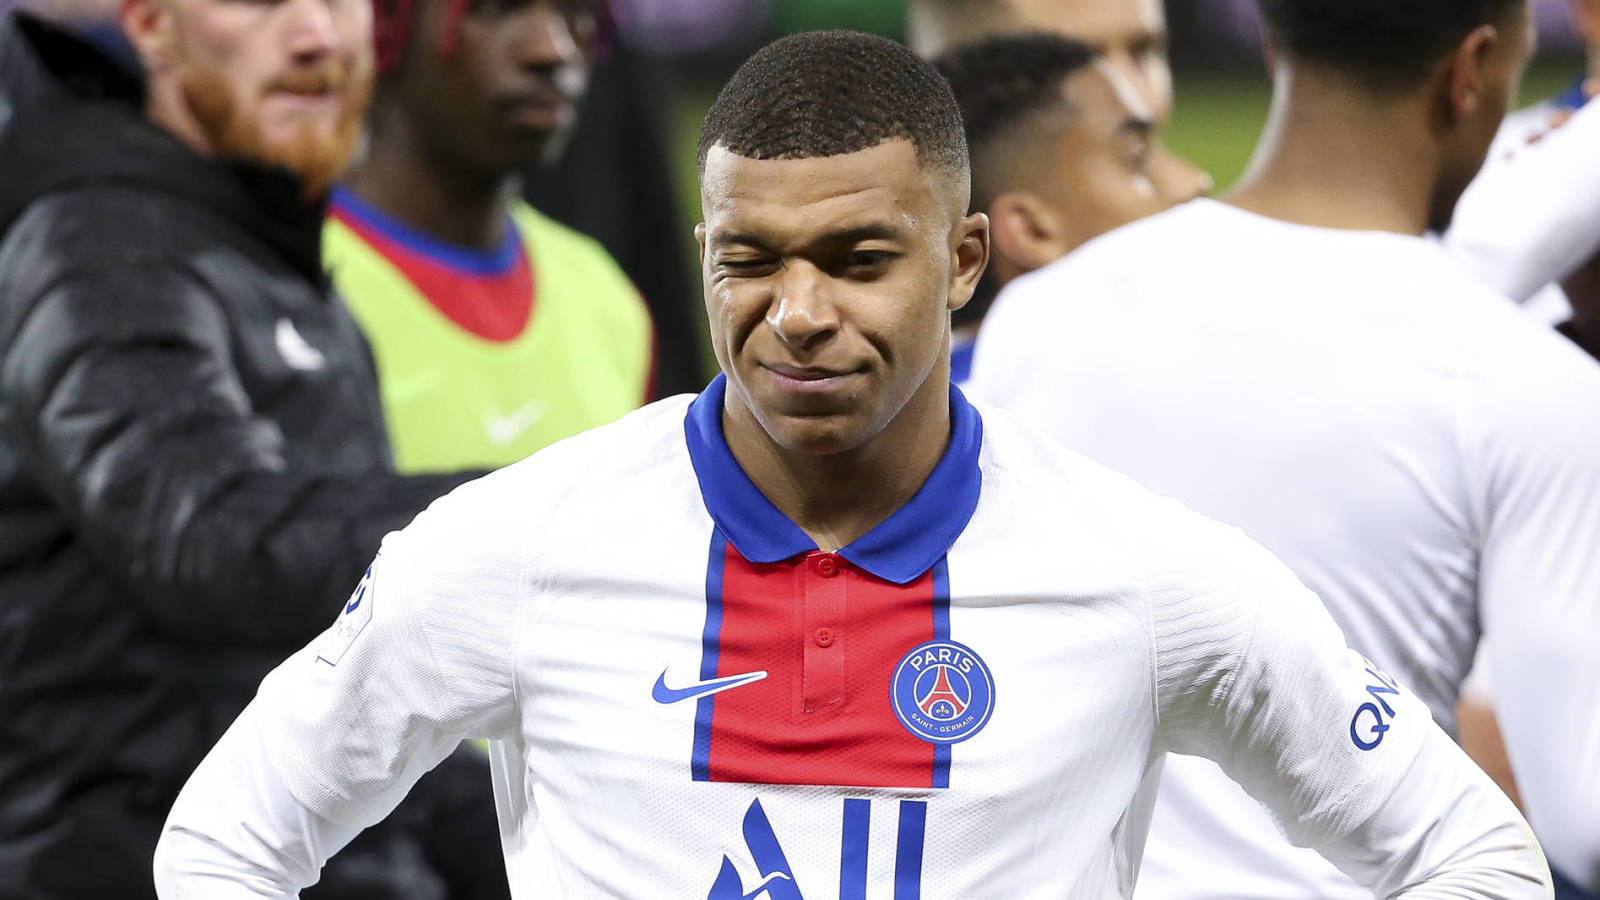 Messi joining PSG increases likelihood Mbappe signs extension